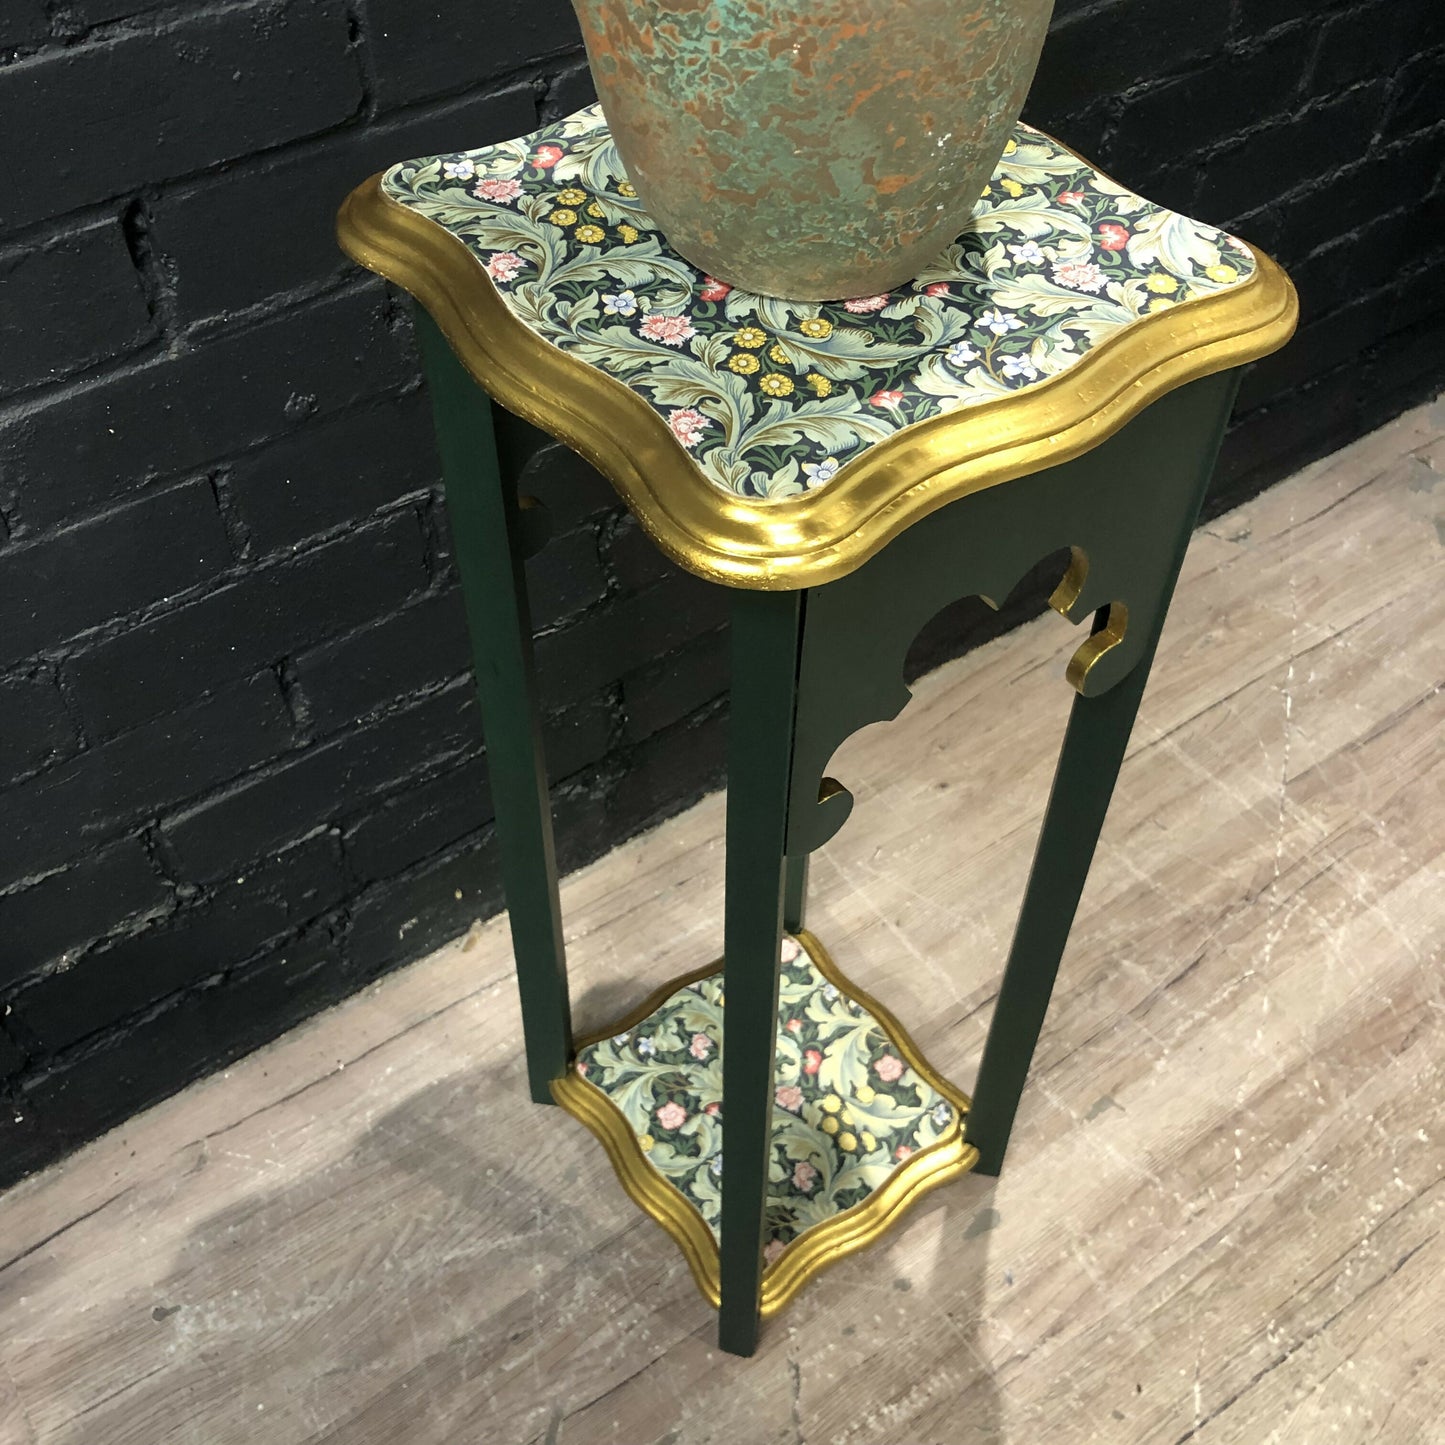 Vintage green & gold plant stand/lamp table